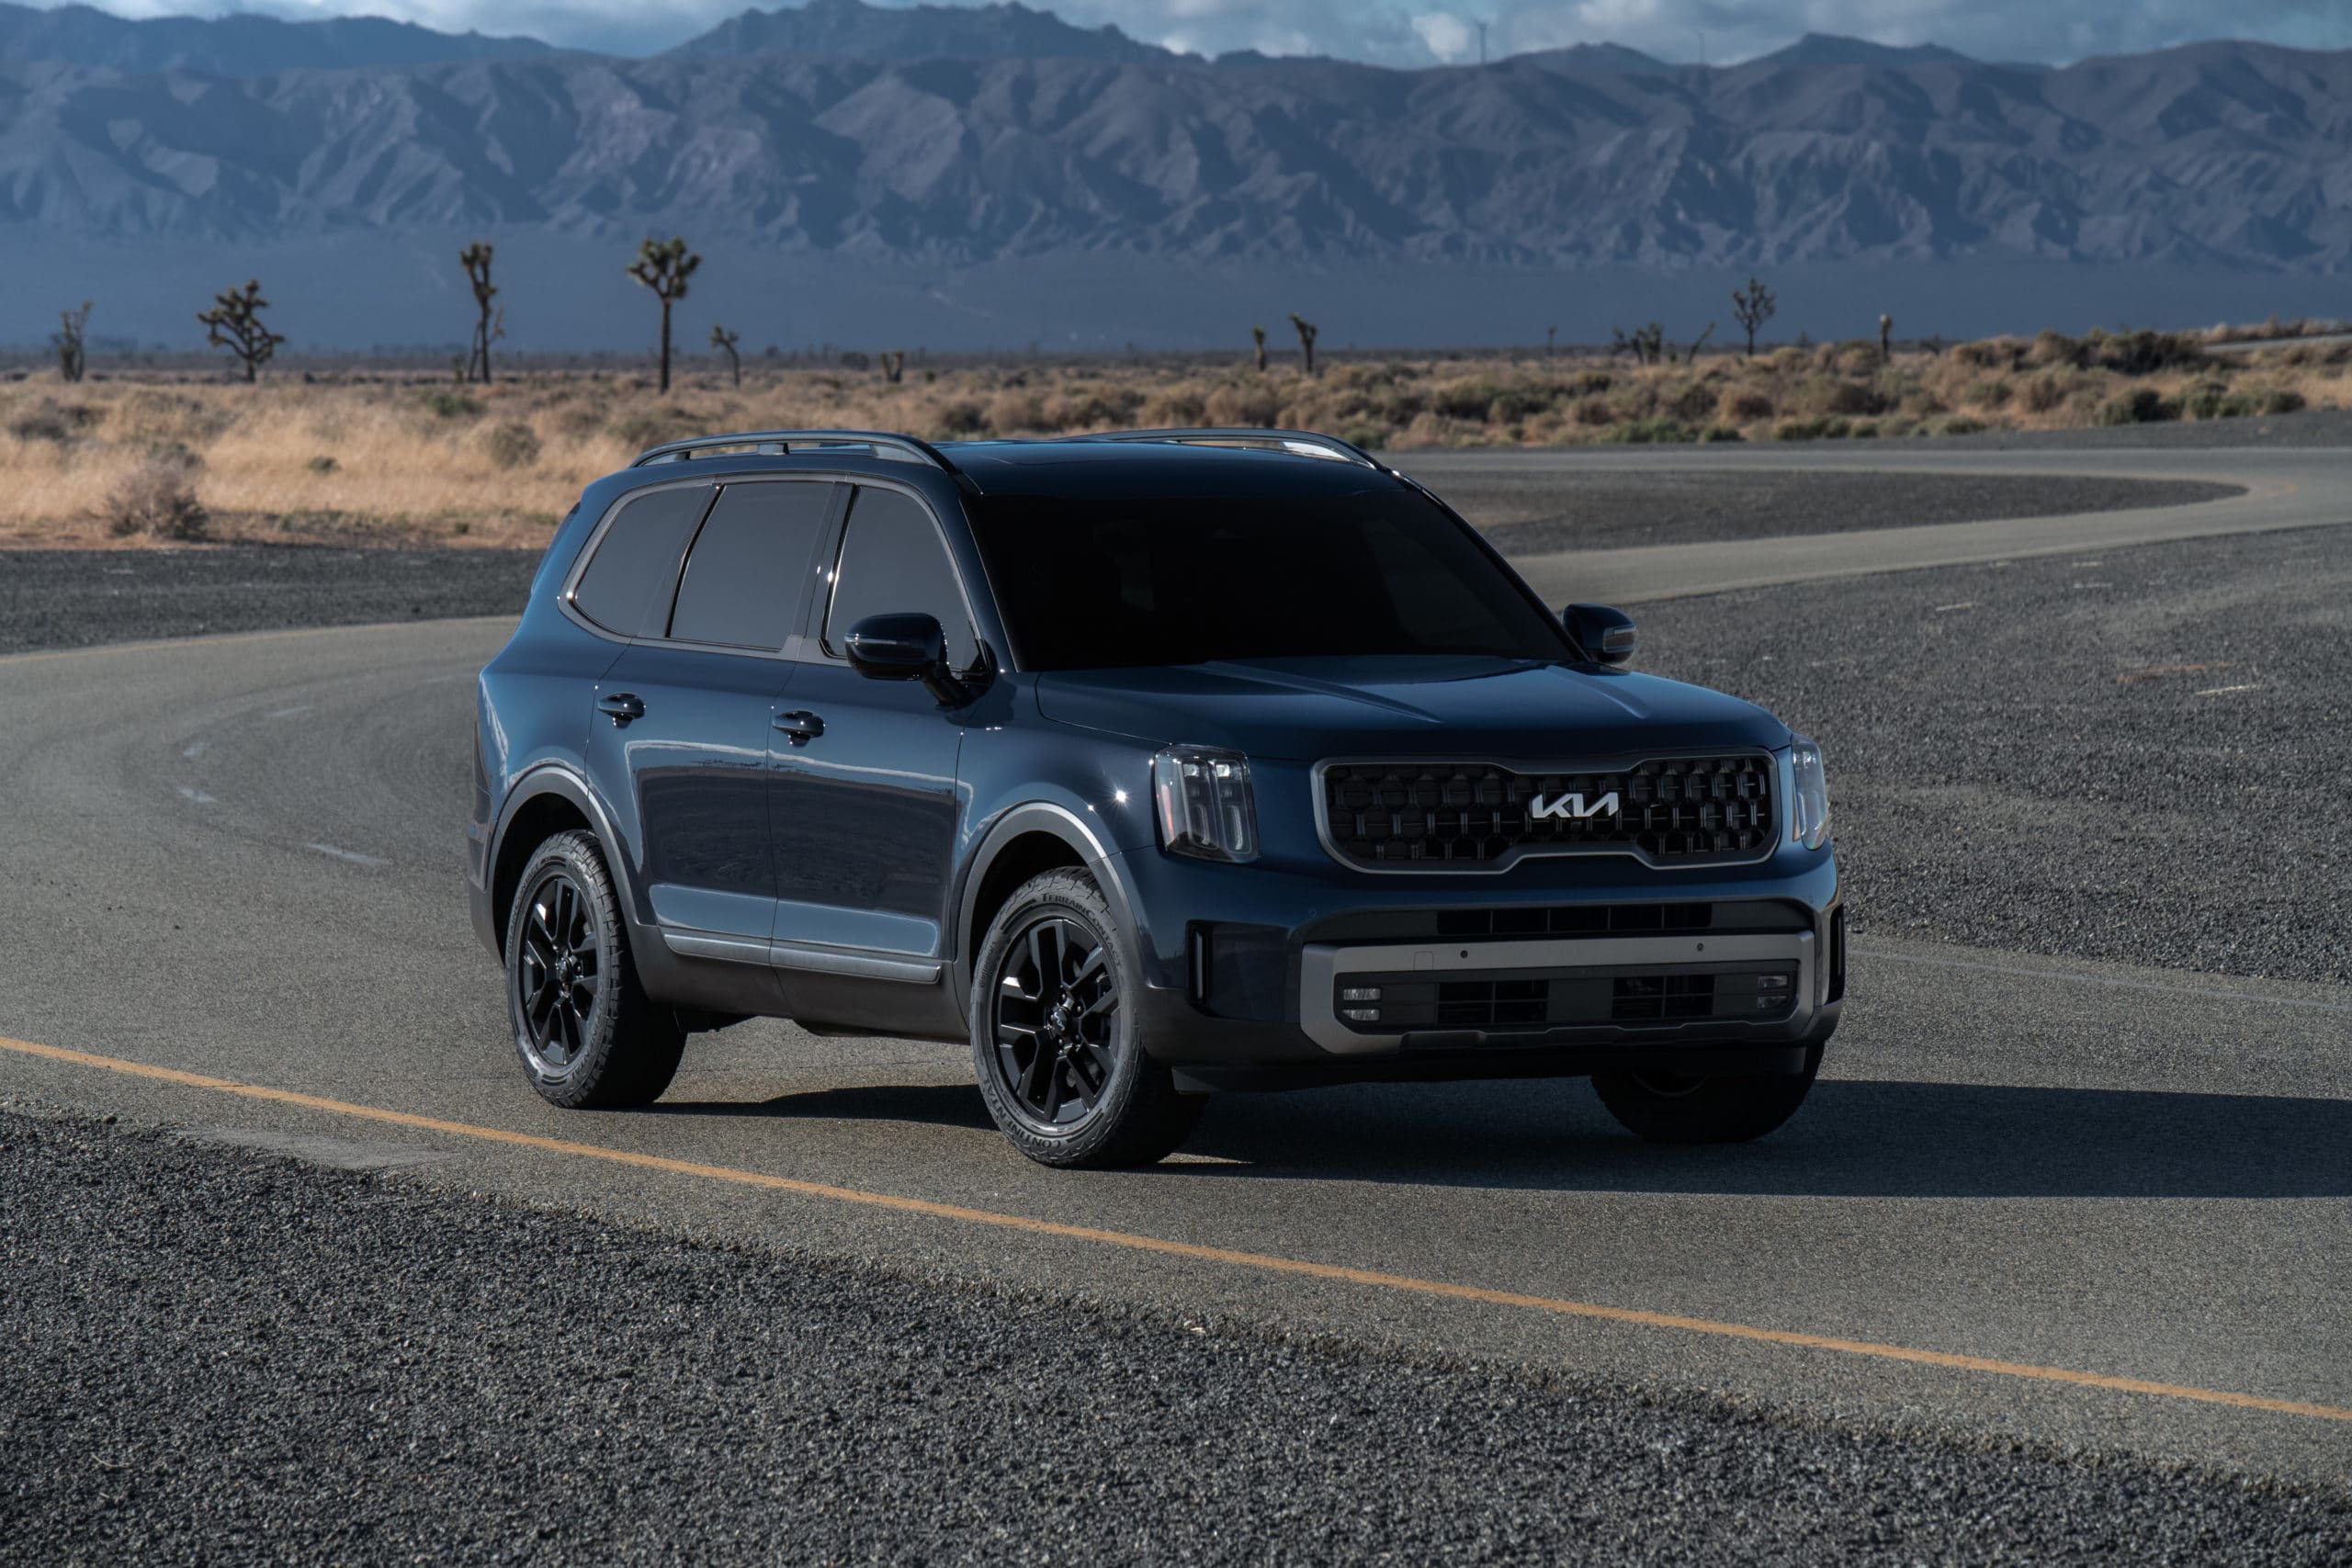 Extensive ADAS features added for 2023 Telluride update